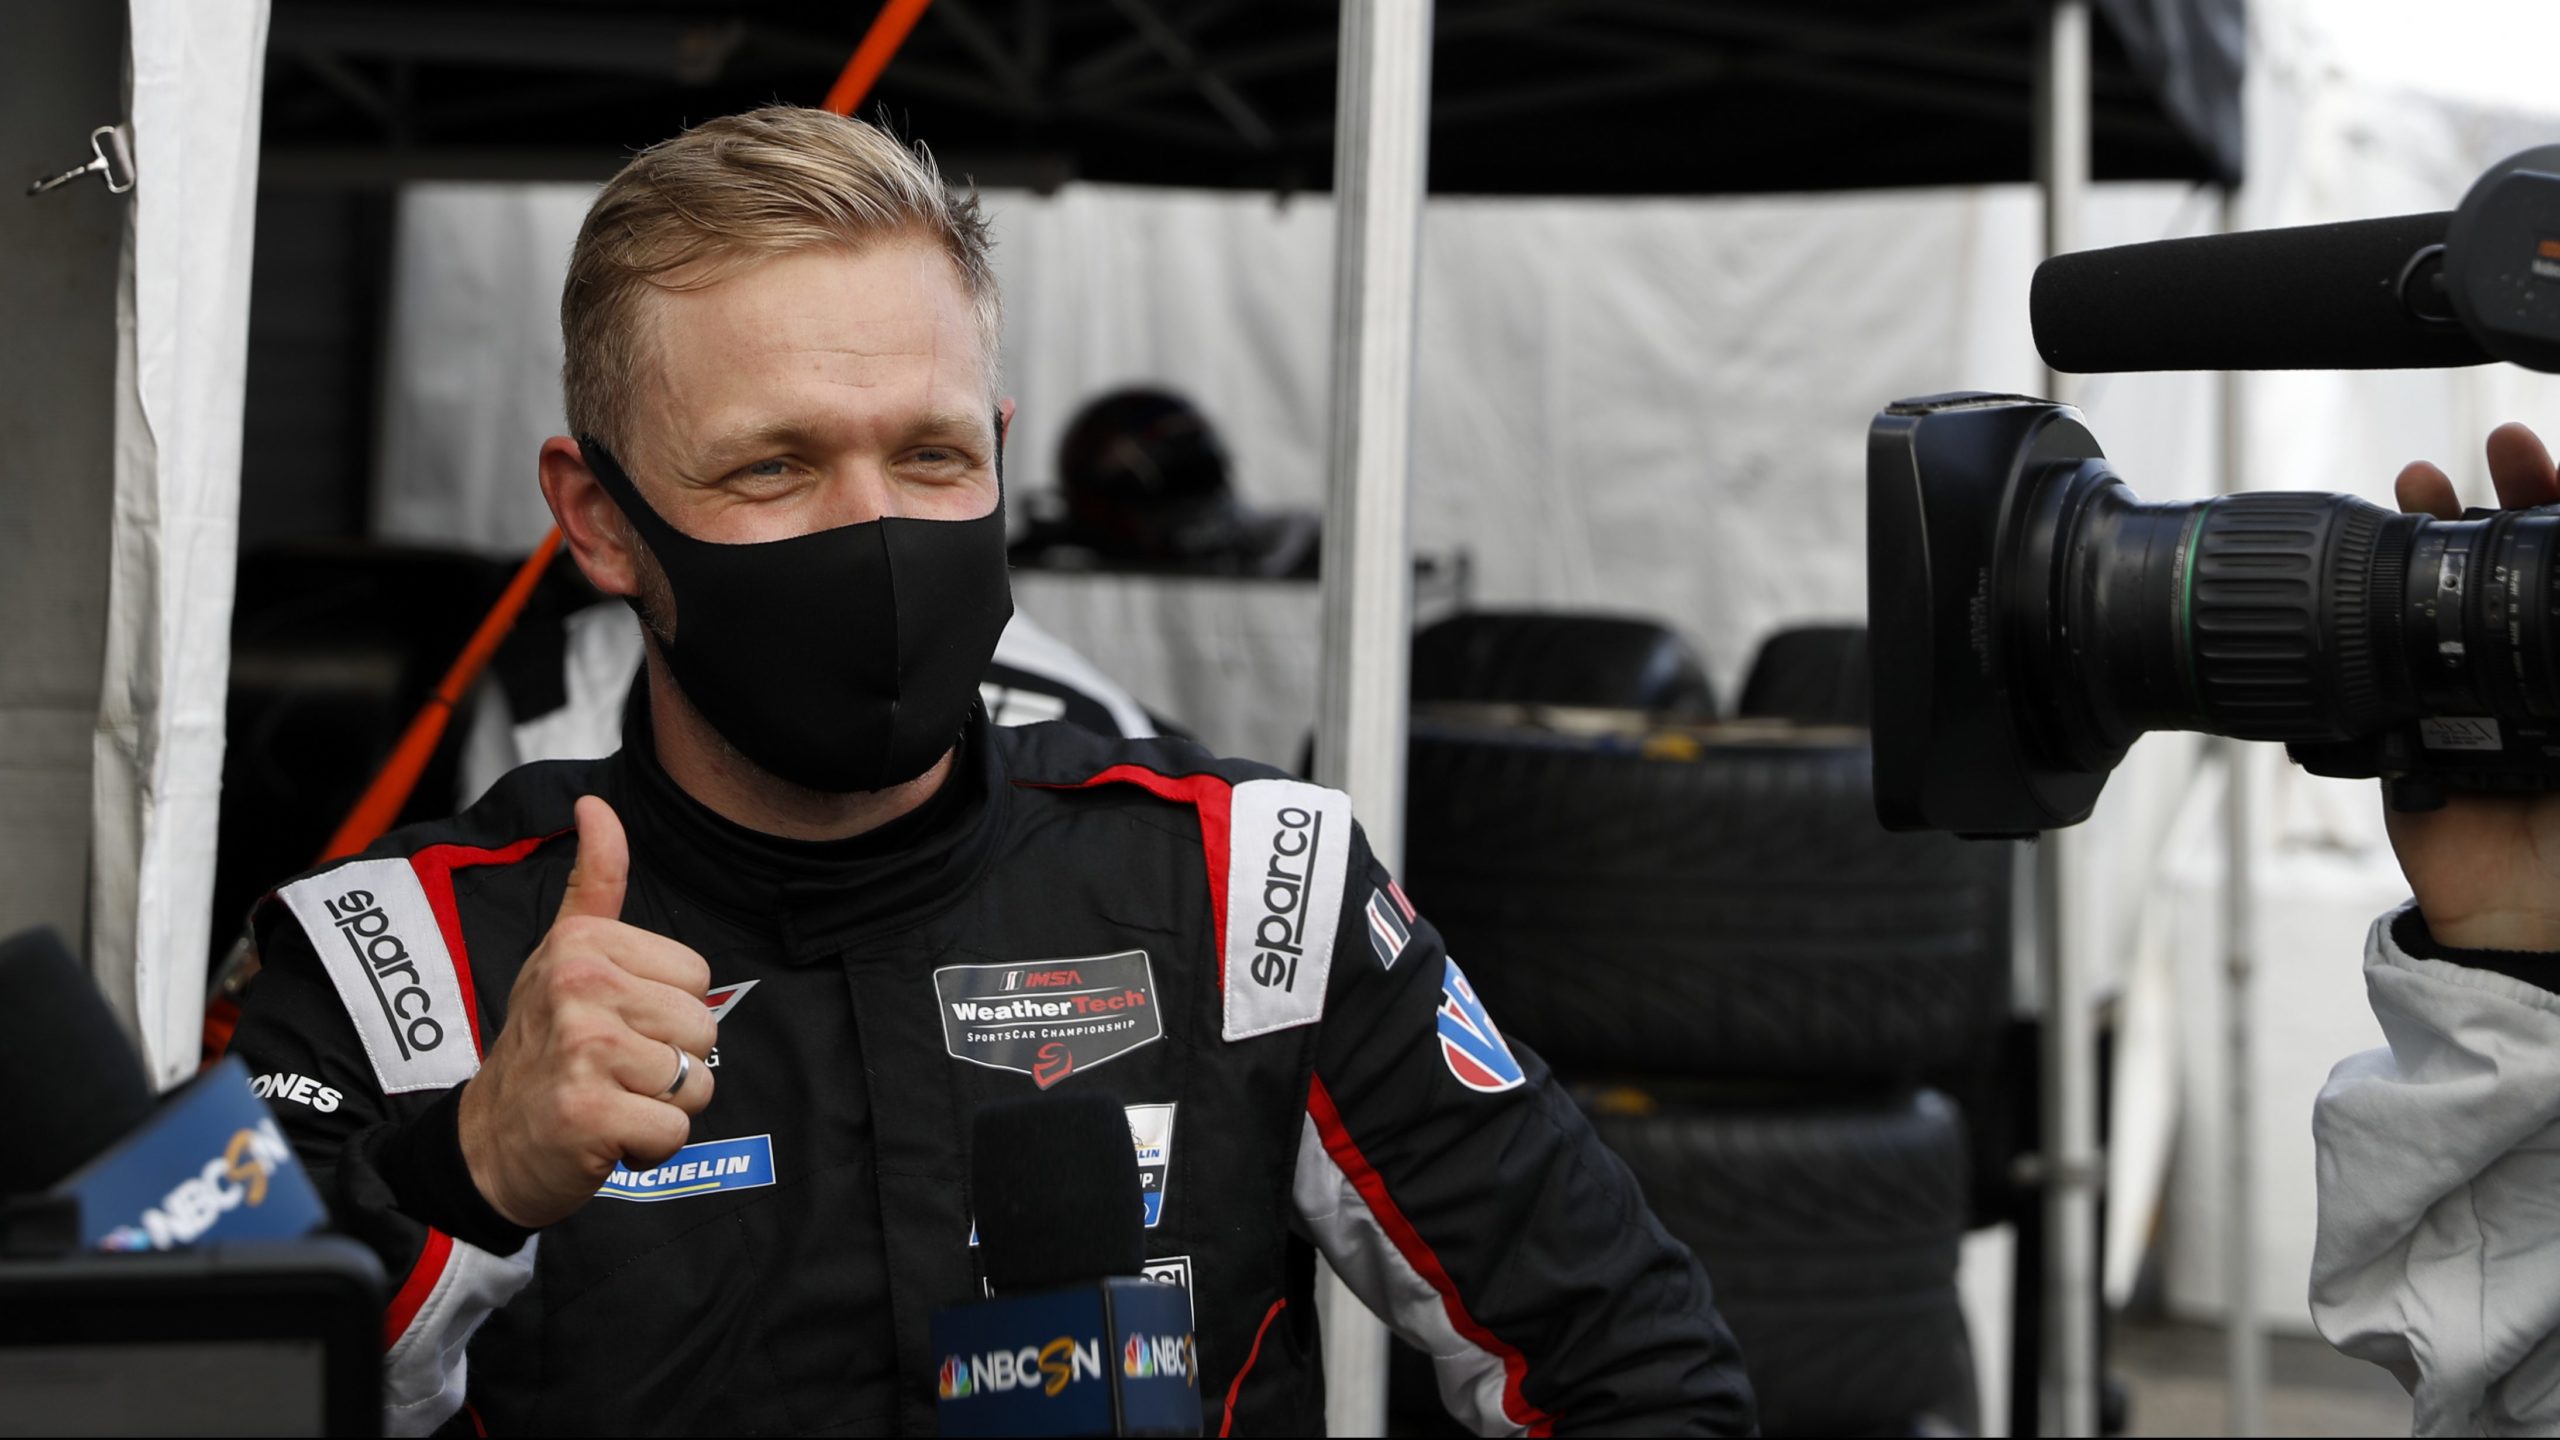 Magnussen will be making Indycar debut filling in for Rosenqvist after injury